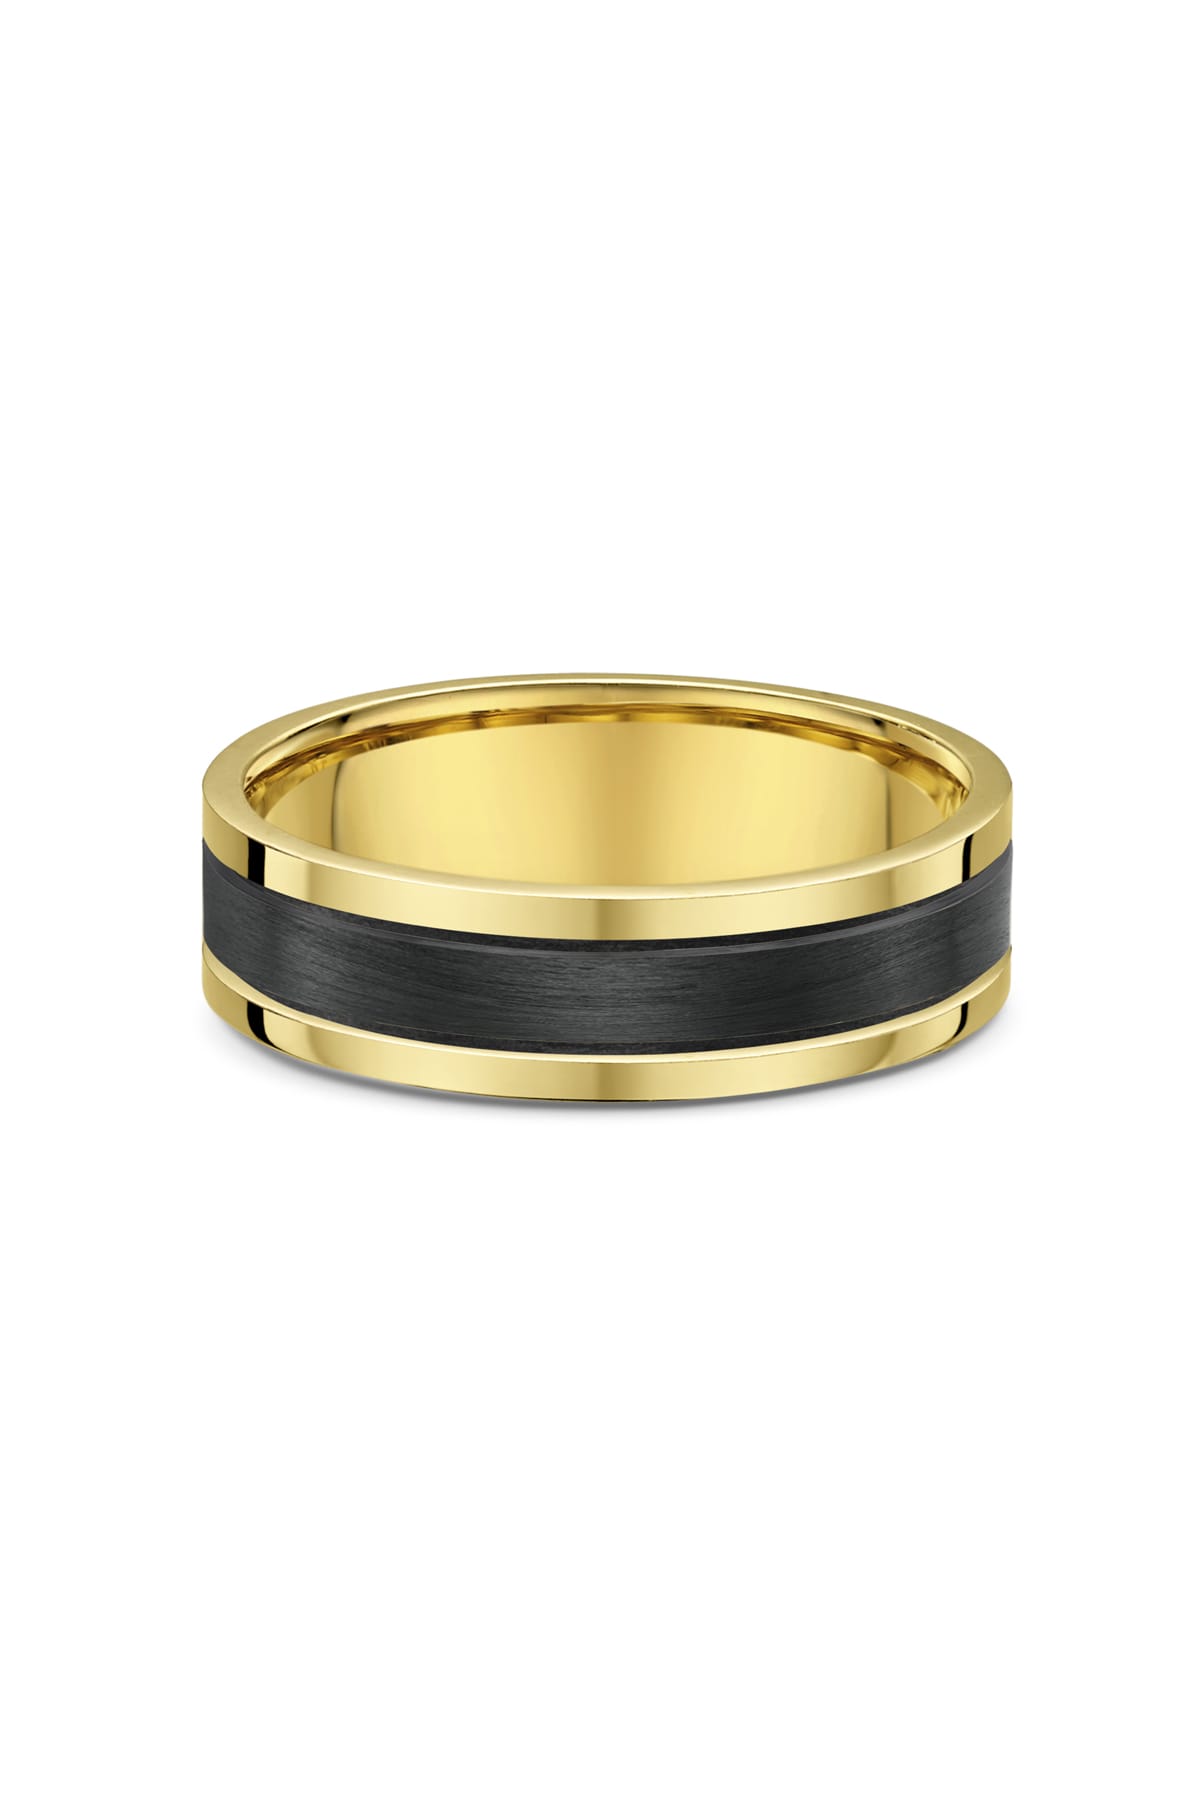 Men's Wedding Ring in Yellow Gold available at LeGassick Diamonds and Jewellery Gold Coast, Australia.